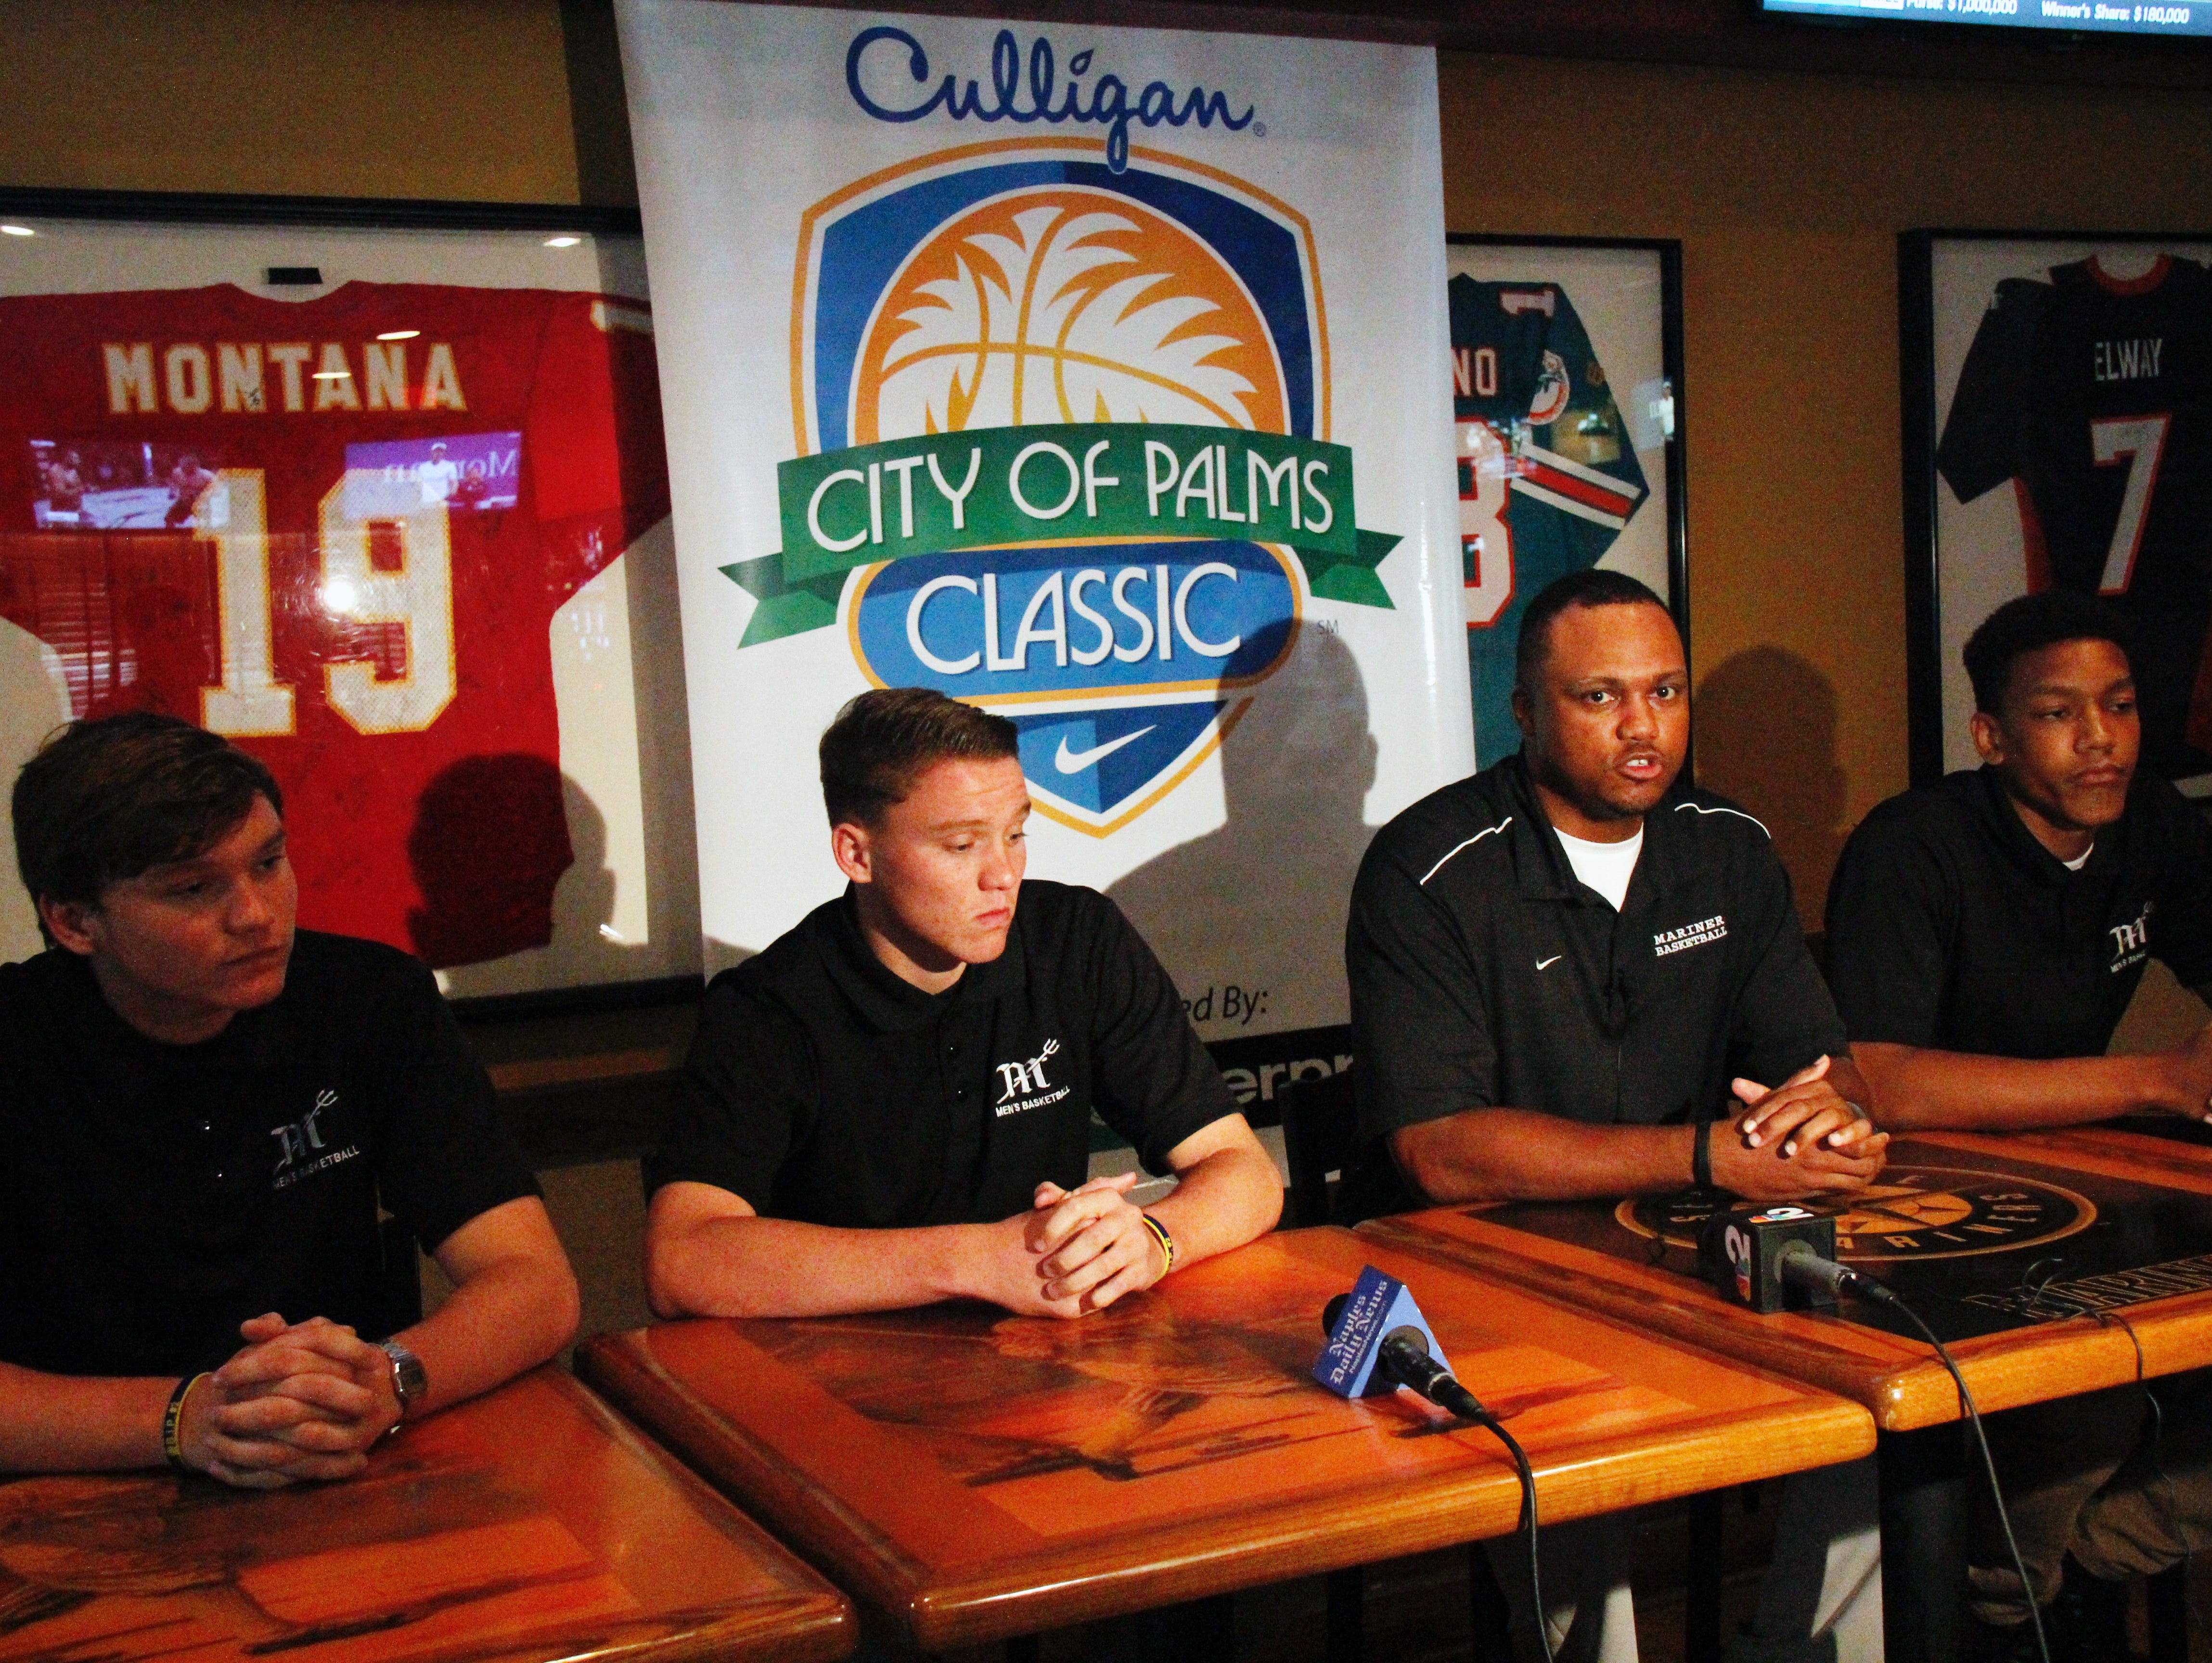 Members of the Cape Coral-Mariner basketball team speak during a news conference at Shoeless Joe's Cafe in Fort Myers for the introduction of this years field in the 2016 City of Palms Basketball Classic on Wednesday.